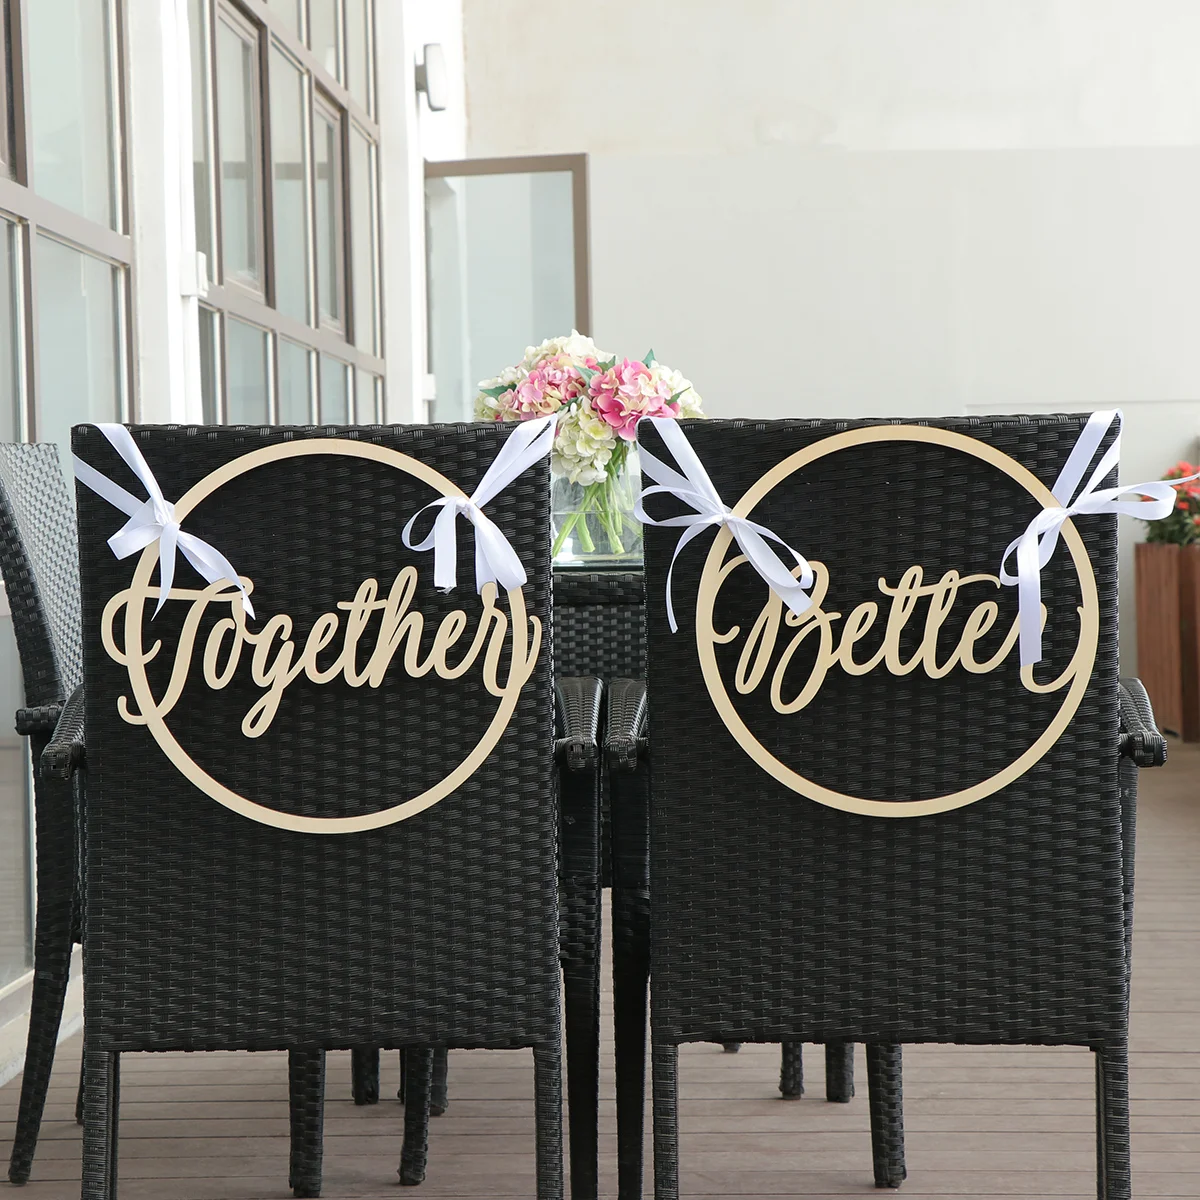 

2pcs Round Wedding Chair Signs Wooden Better Together for Bride and Groom Wedding Chairs Hanging Craft